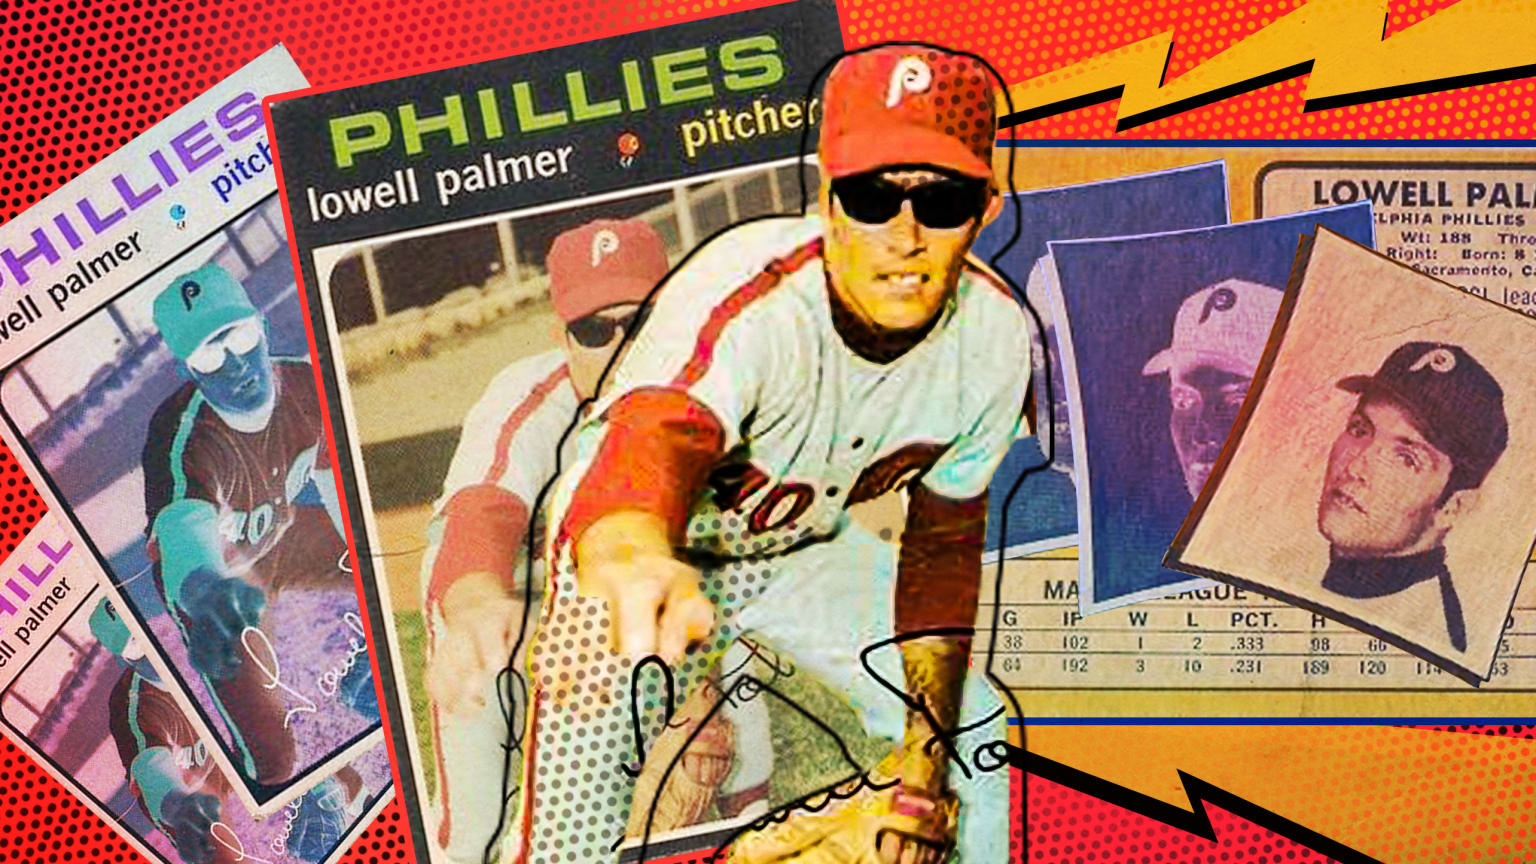 A player in a Phillies uniform poses in a pitching position, wearing sunglasses. Behind him, the image is repeated on a baseball card, then again the same card in negative colors